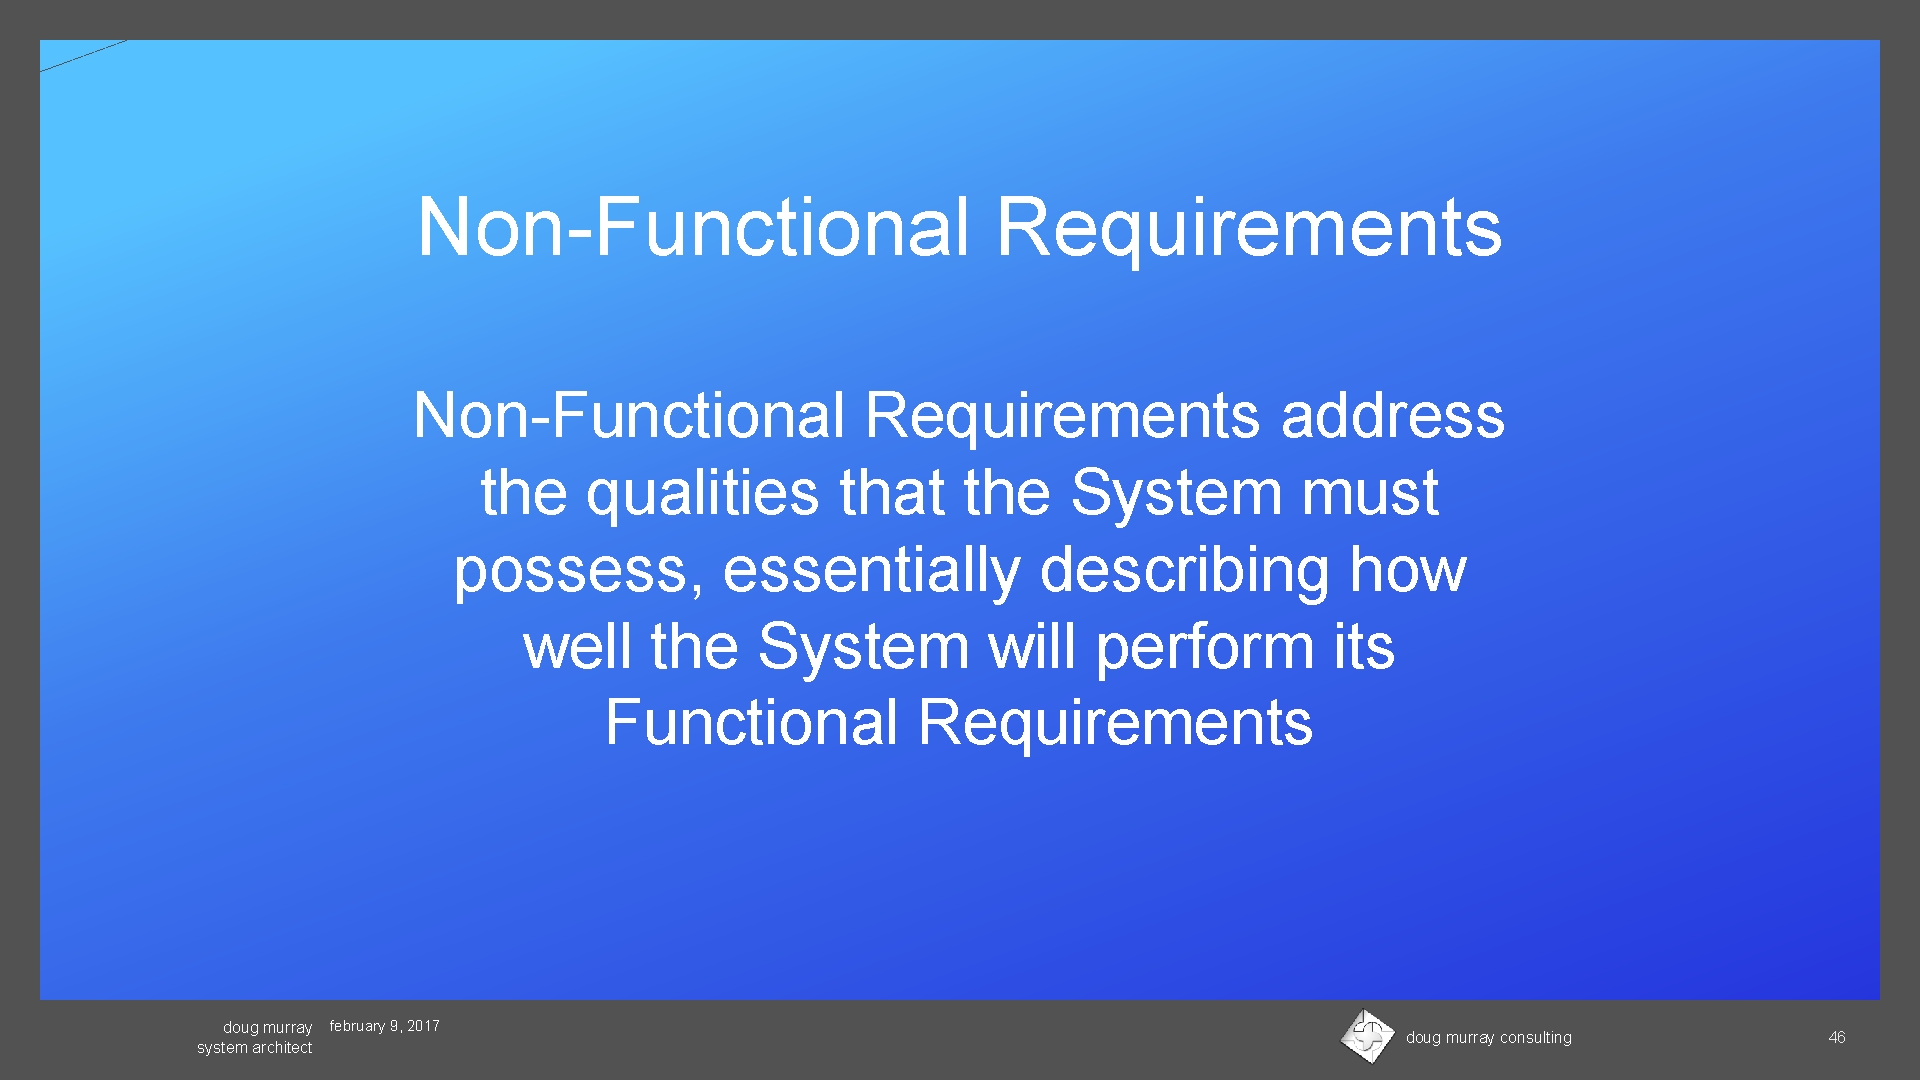 Non-Functional Requirements address the qualities that the System must possess, essentially describing how well